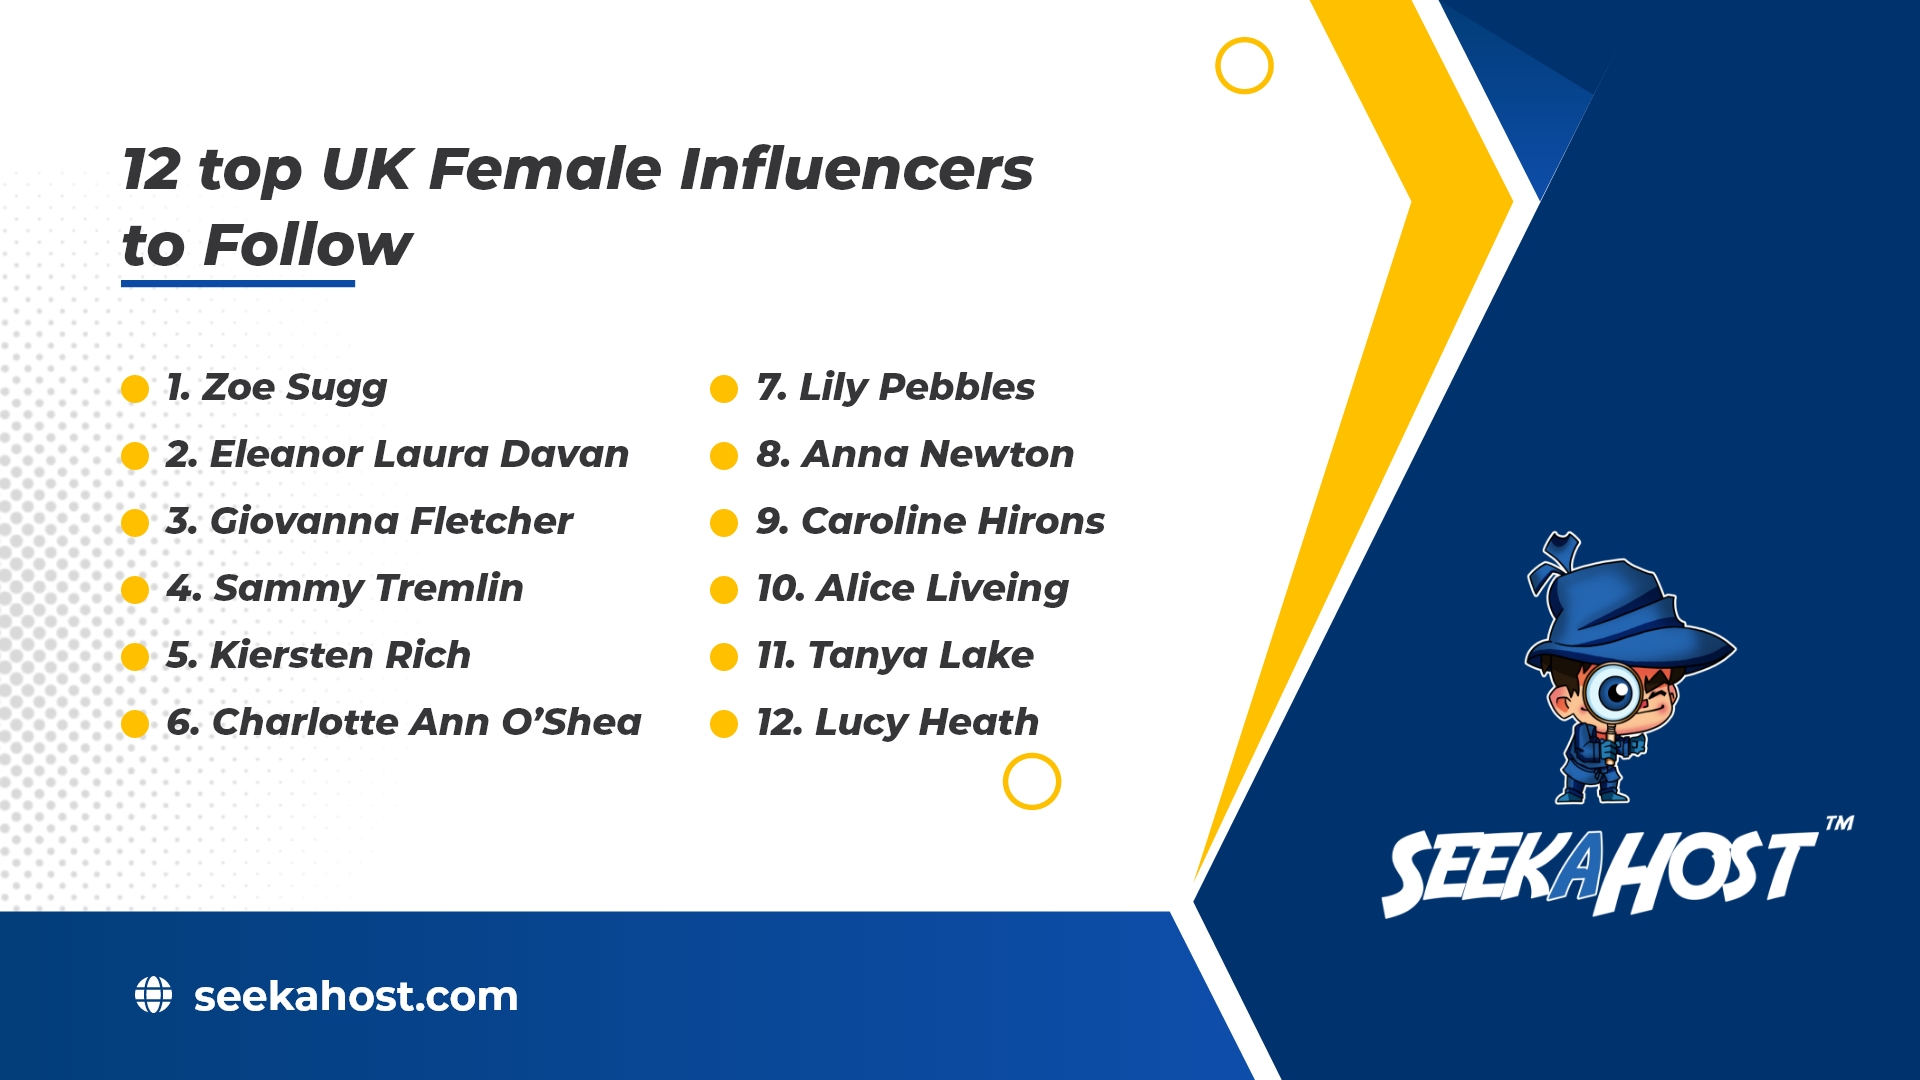 uk-f12-top-uk-female-influencers-to follow